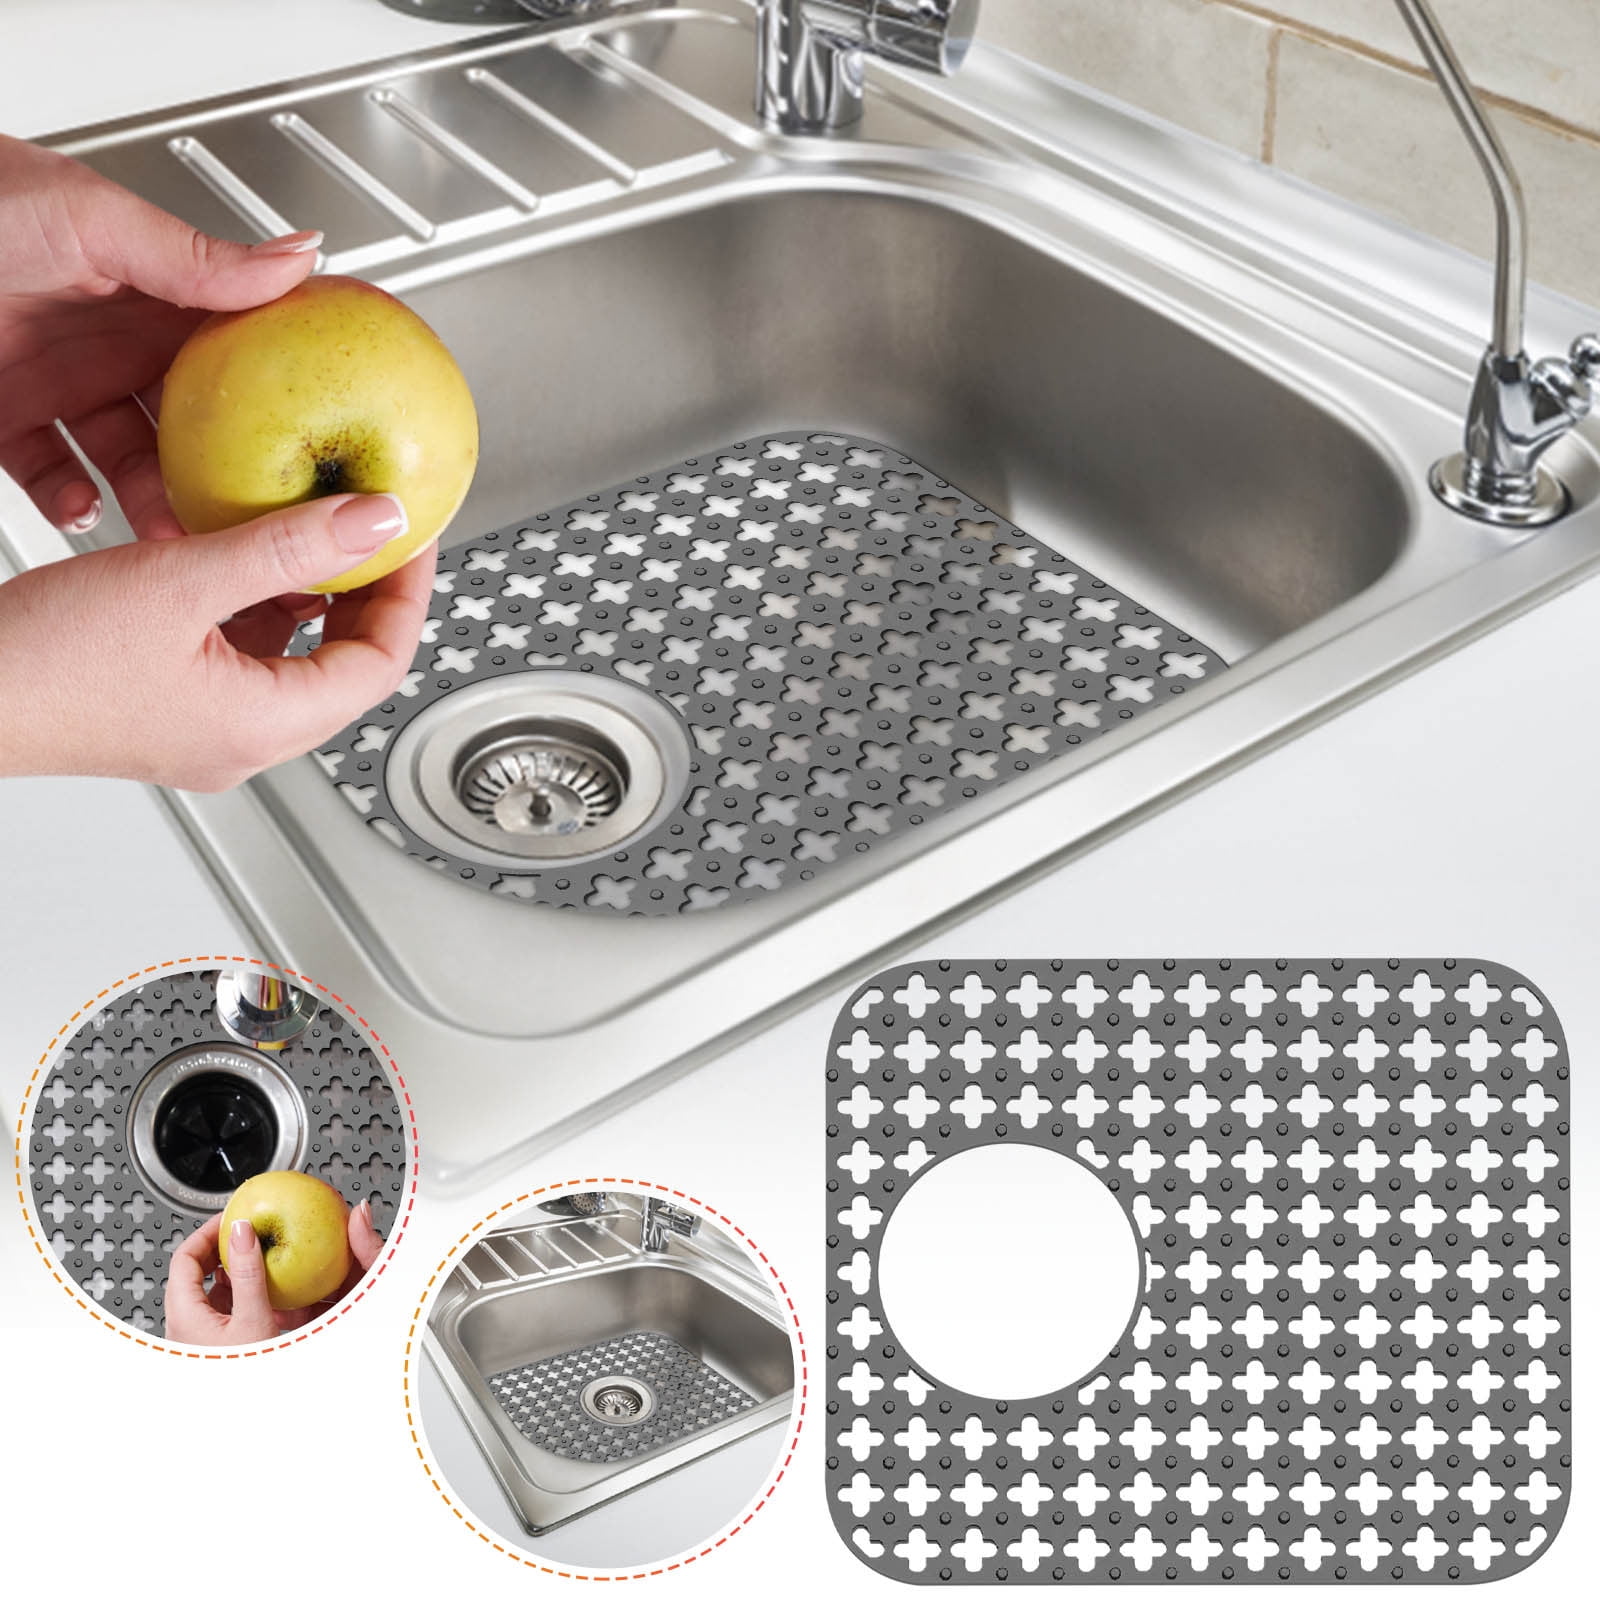 Sink Protectors for Kitchen Sink, 28 * 15'' Silicone Sink Mats for Bottom  of Farmhouse Stainless Steel Porcelain with Rear Drain Hole for Sink Bowl 